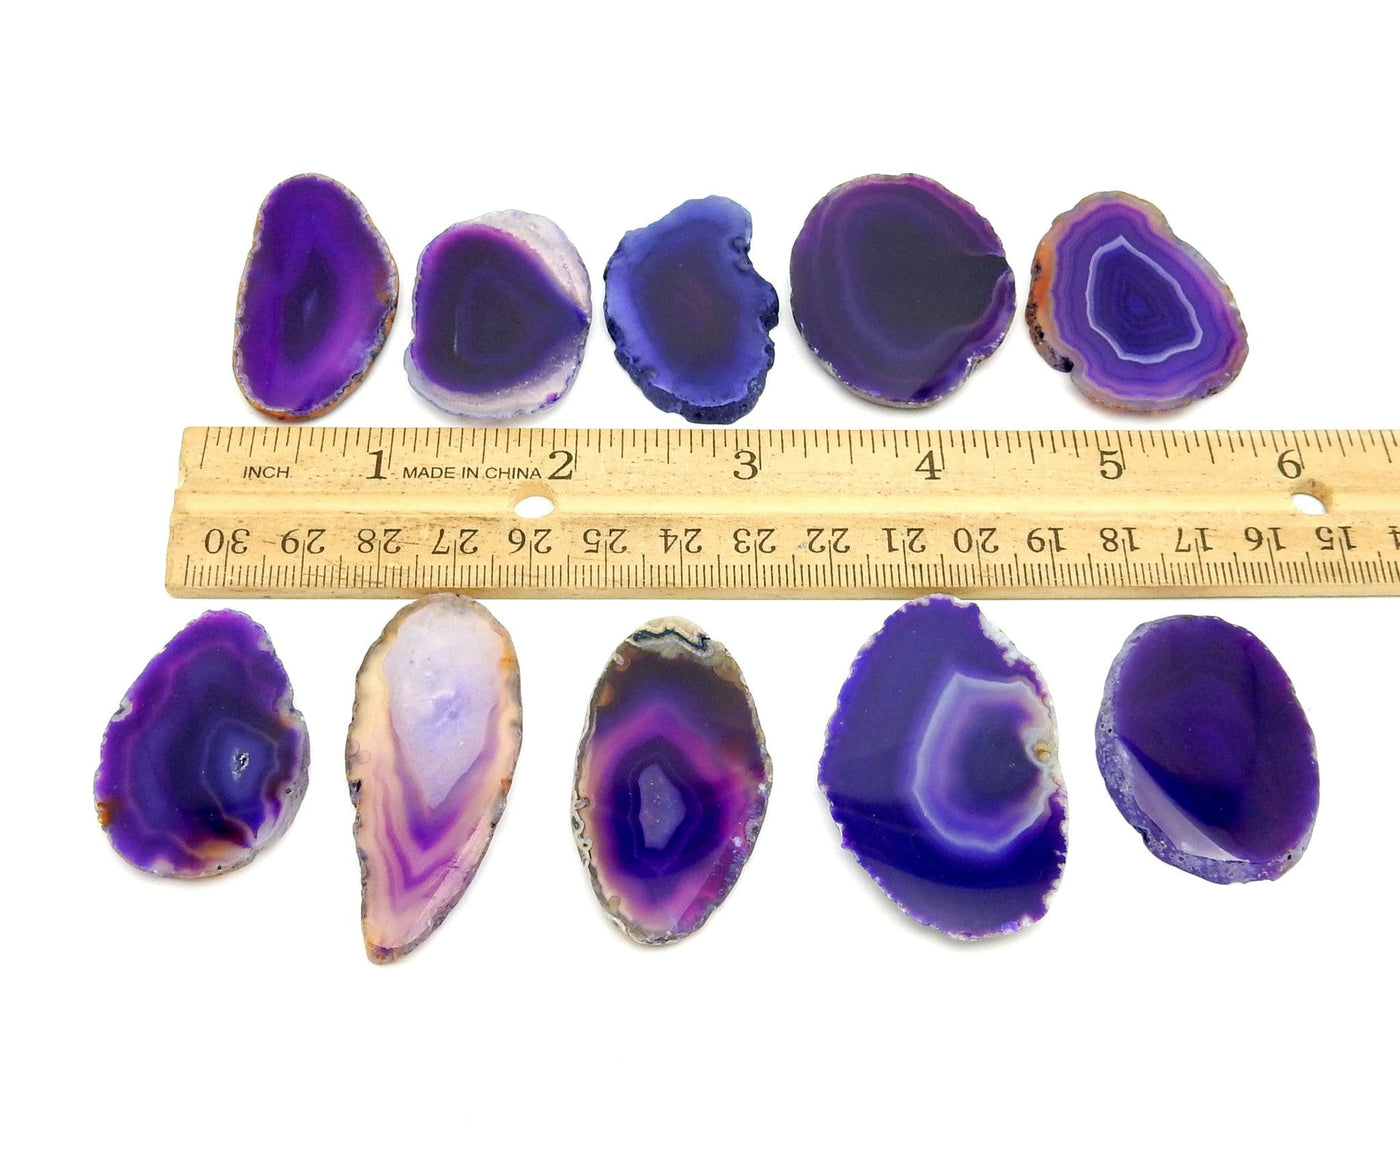 Purple Agate Slices - Size 000 - next to a ruler for size reference